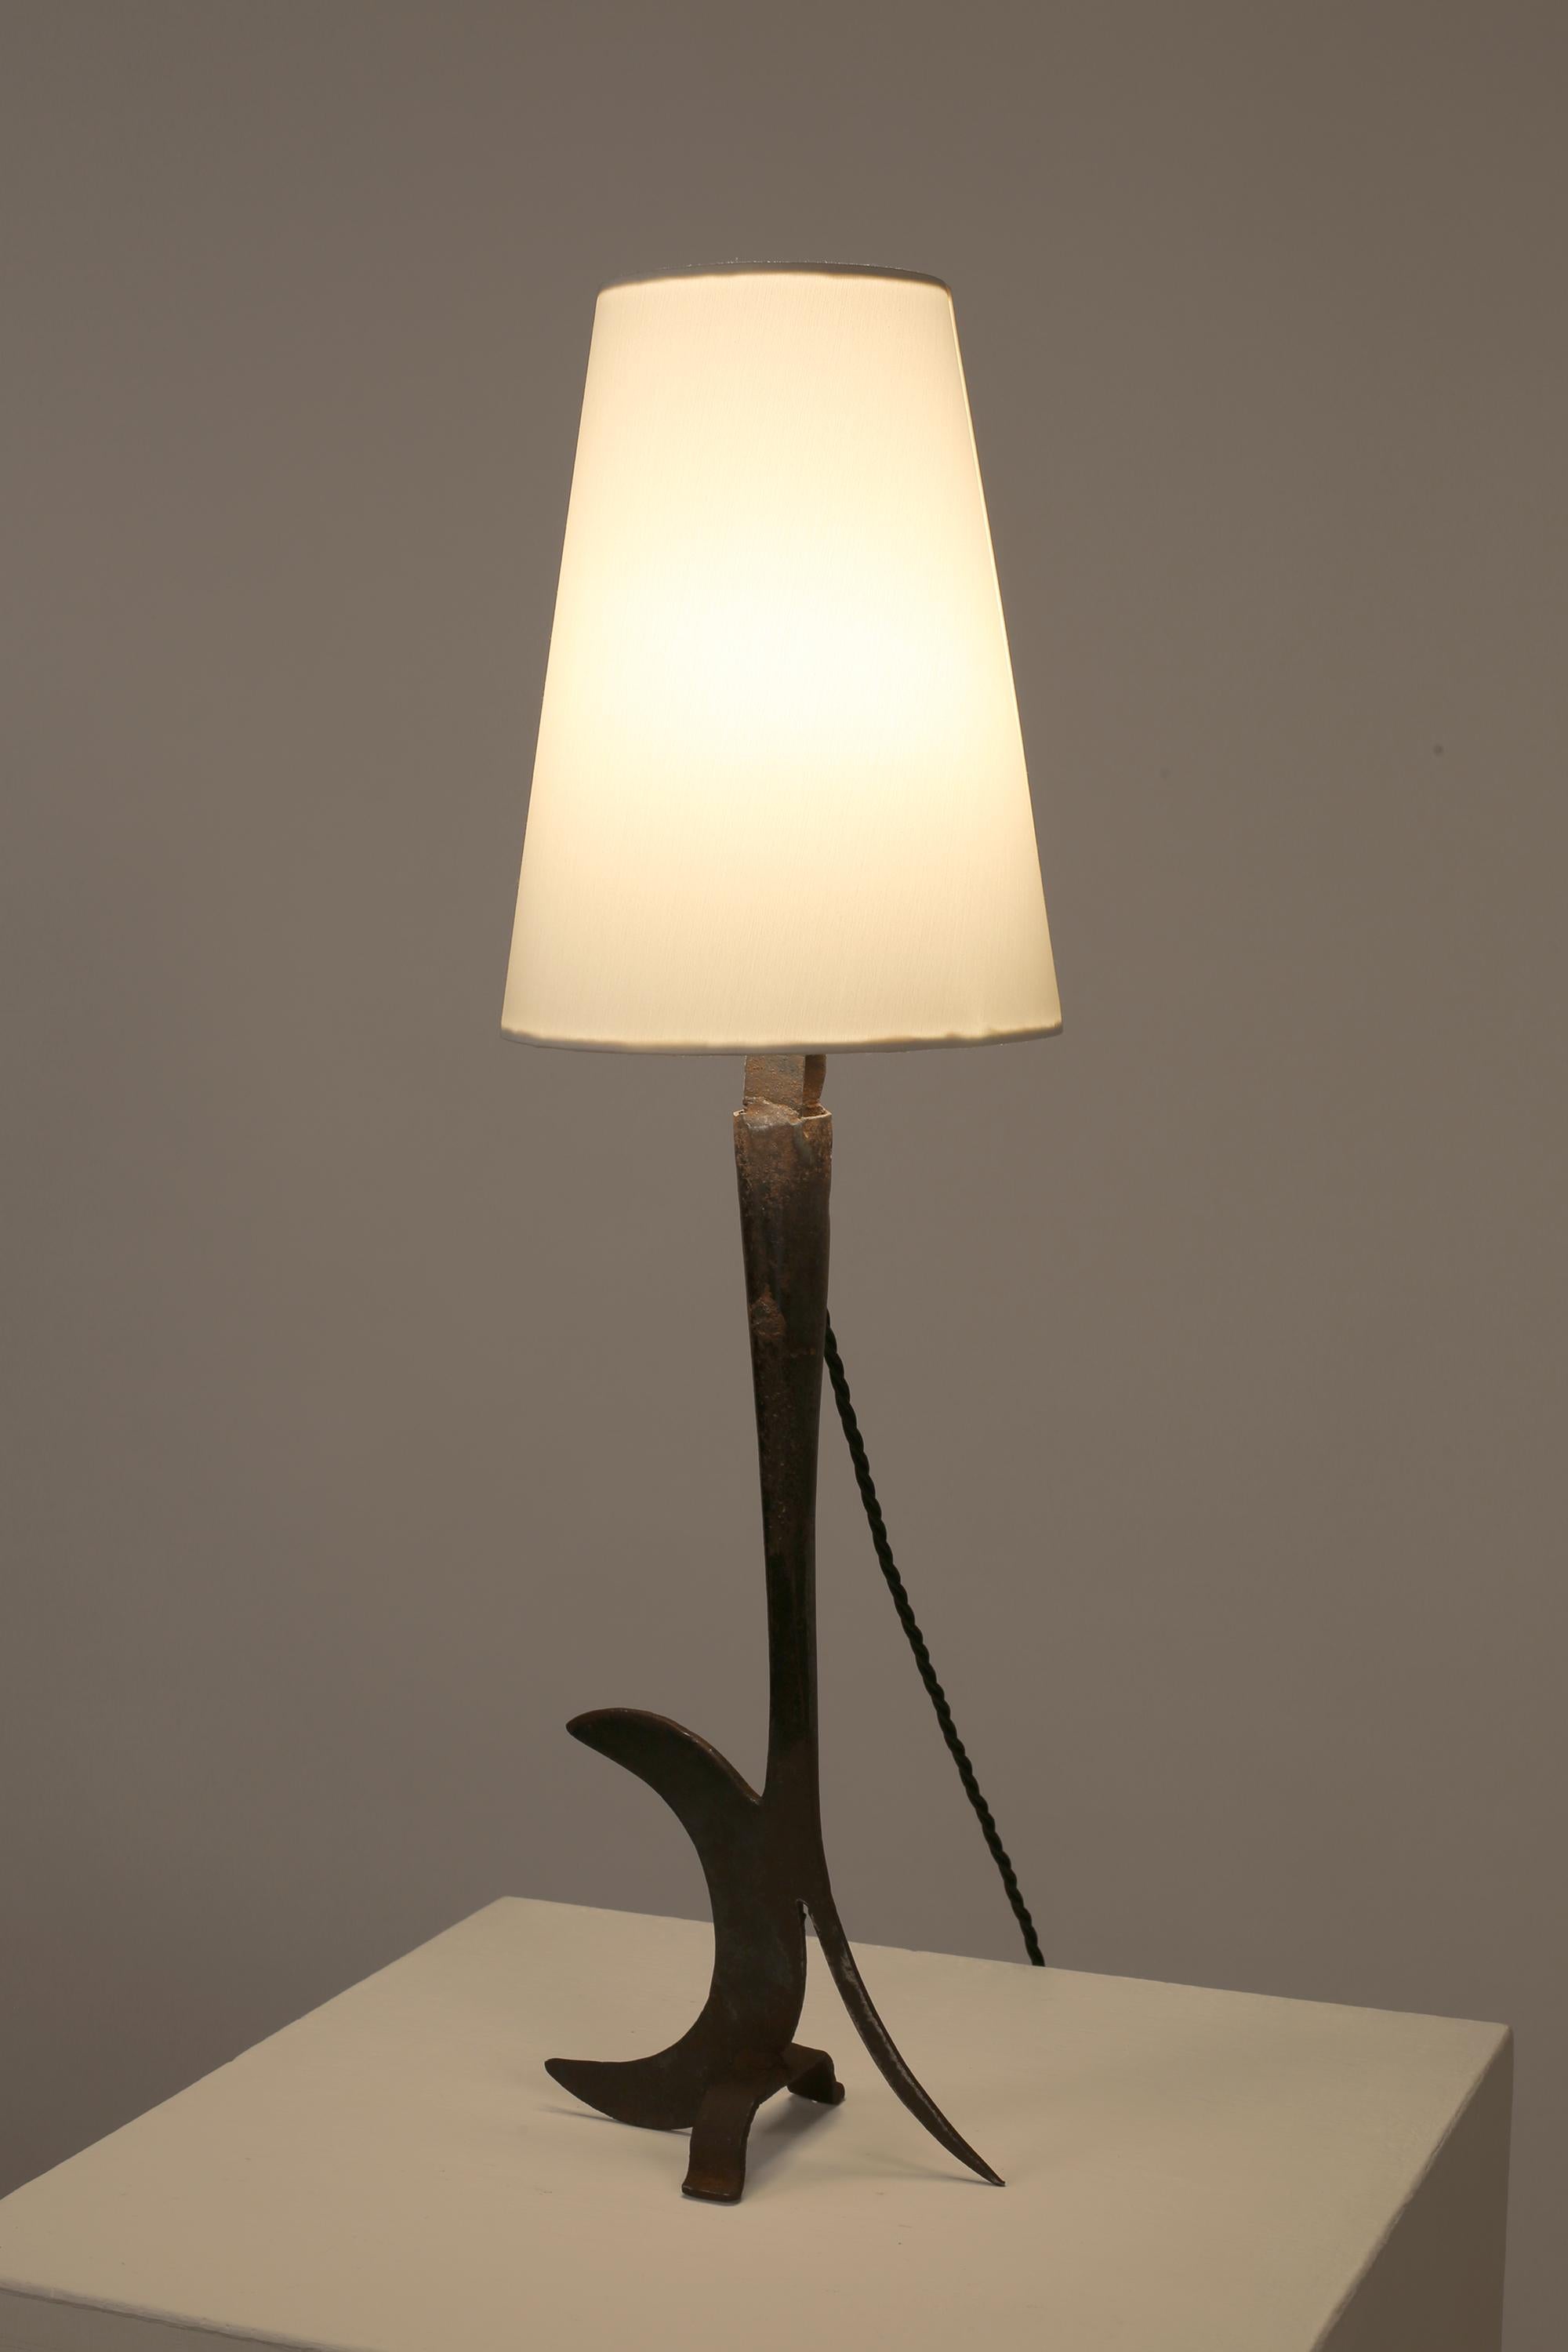 An abstract forged and welded iron table lamp, partly formed from an antique agricultural tool - typical folk-art work of the Provence region. French, c. 1950s. Supplied with a bespoke white cotton cone shade.